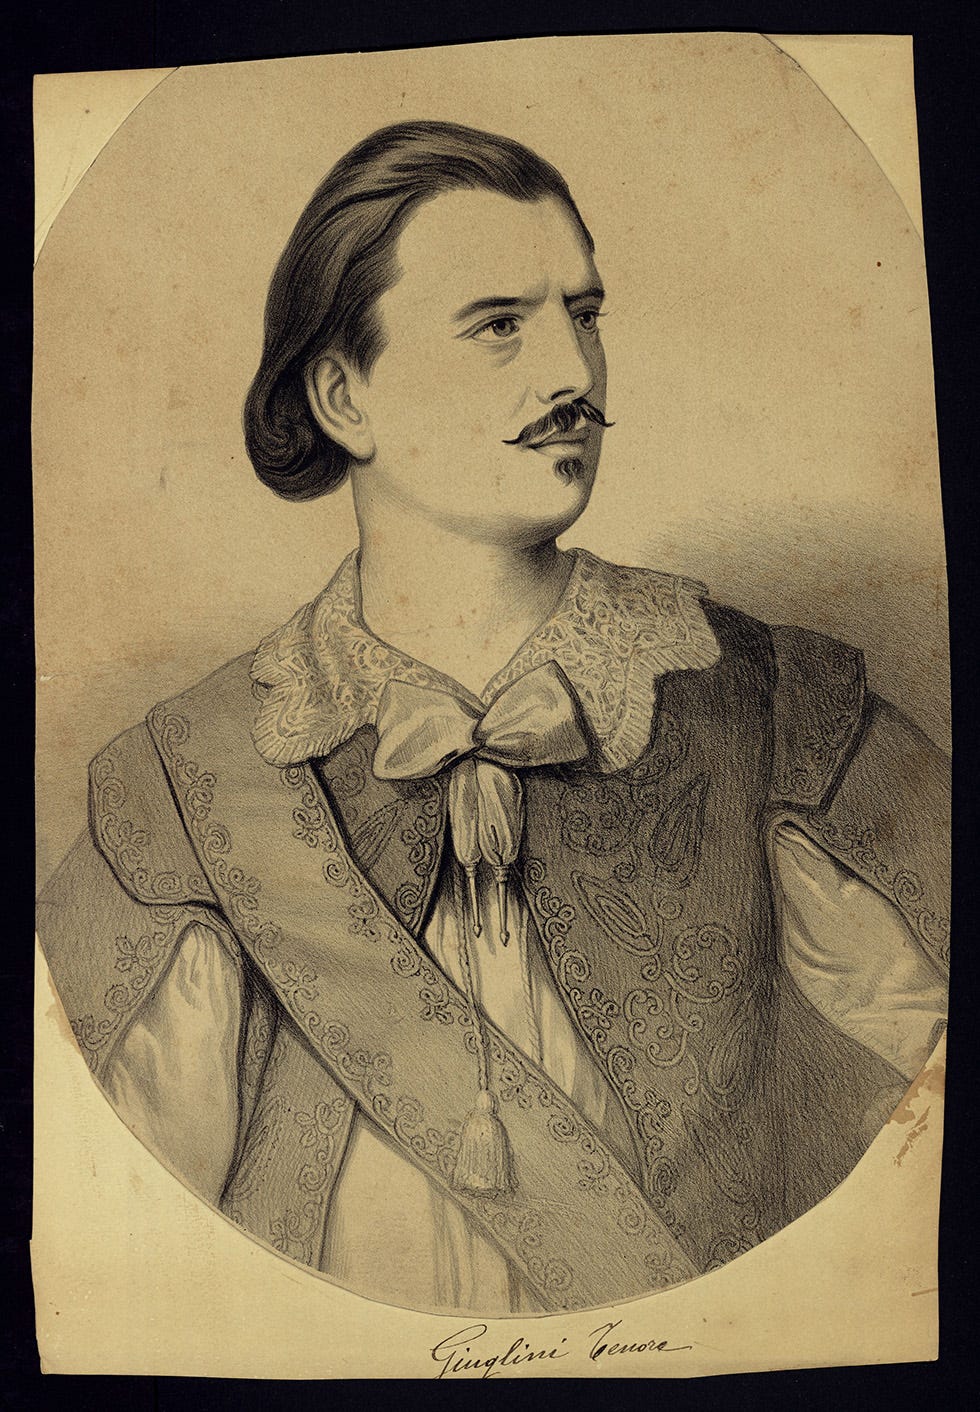 A lithograph of tenor Antonion Giuglini in costume. White man with swept back, long dark hair, moustache and underlip beard. His costume looks as though it's meant to be seventeenth century.